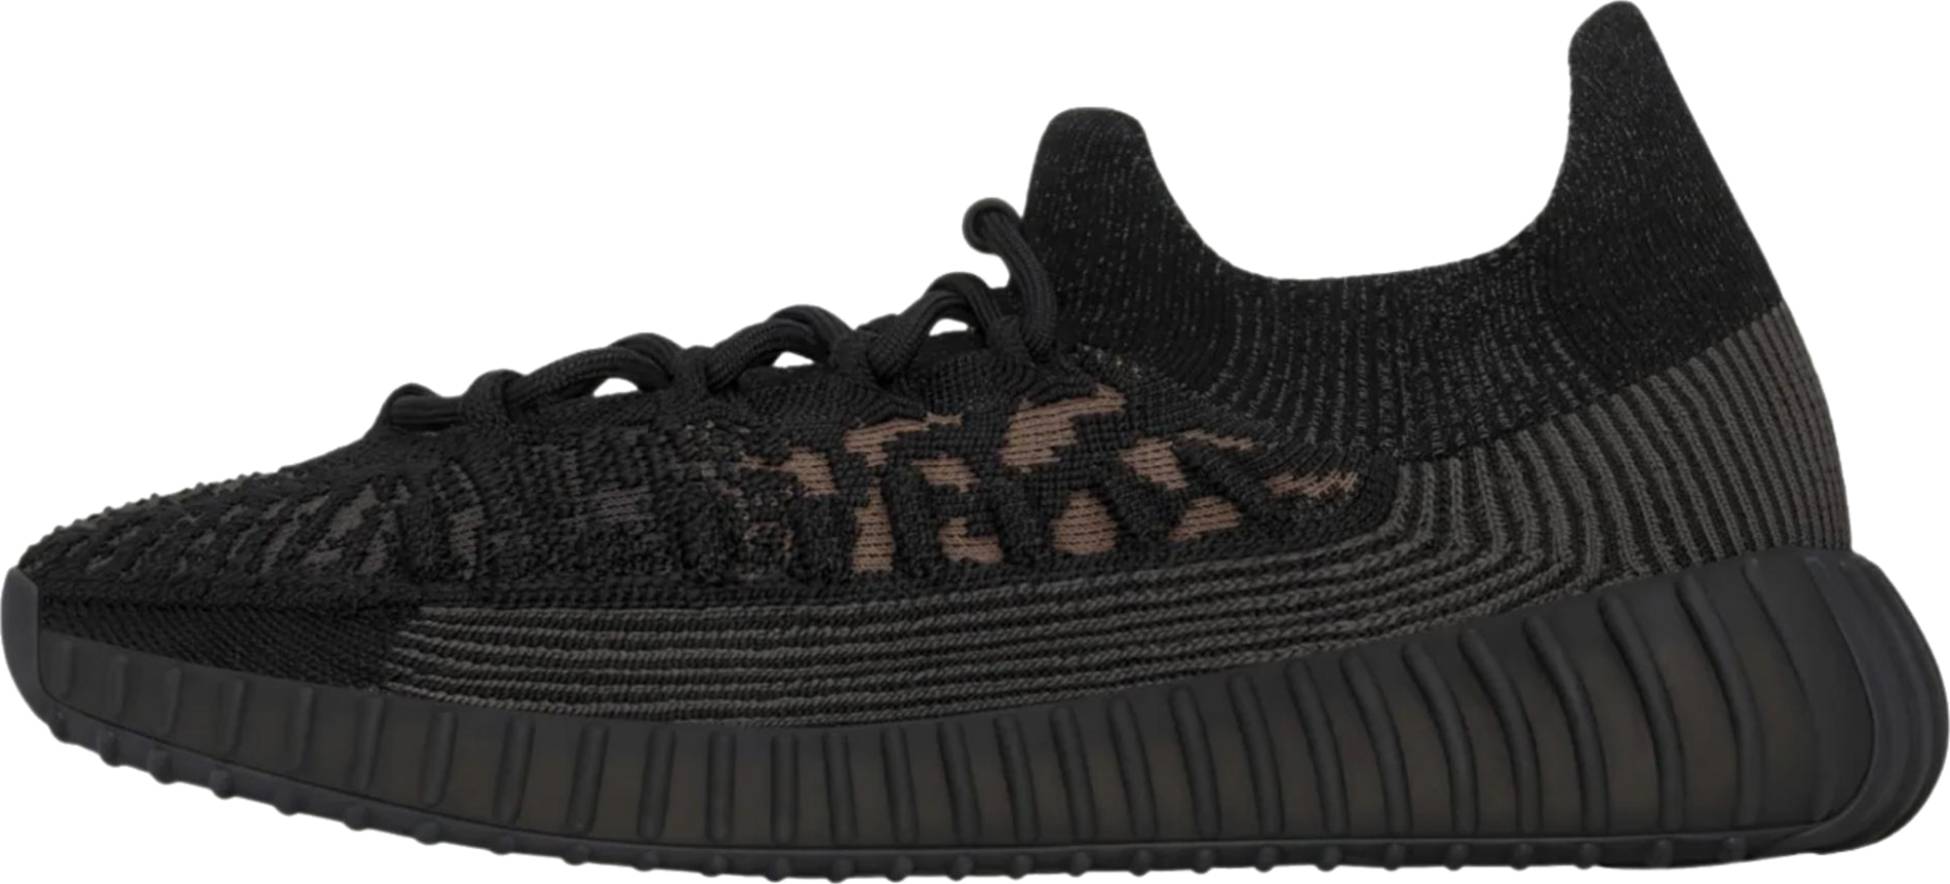 Adidas Yeezy 350 V2 CMPCT sneakers in 4 colors (only $159) | RunRepeat